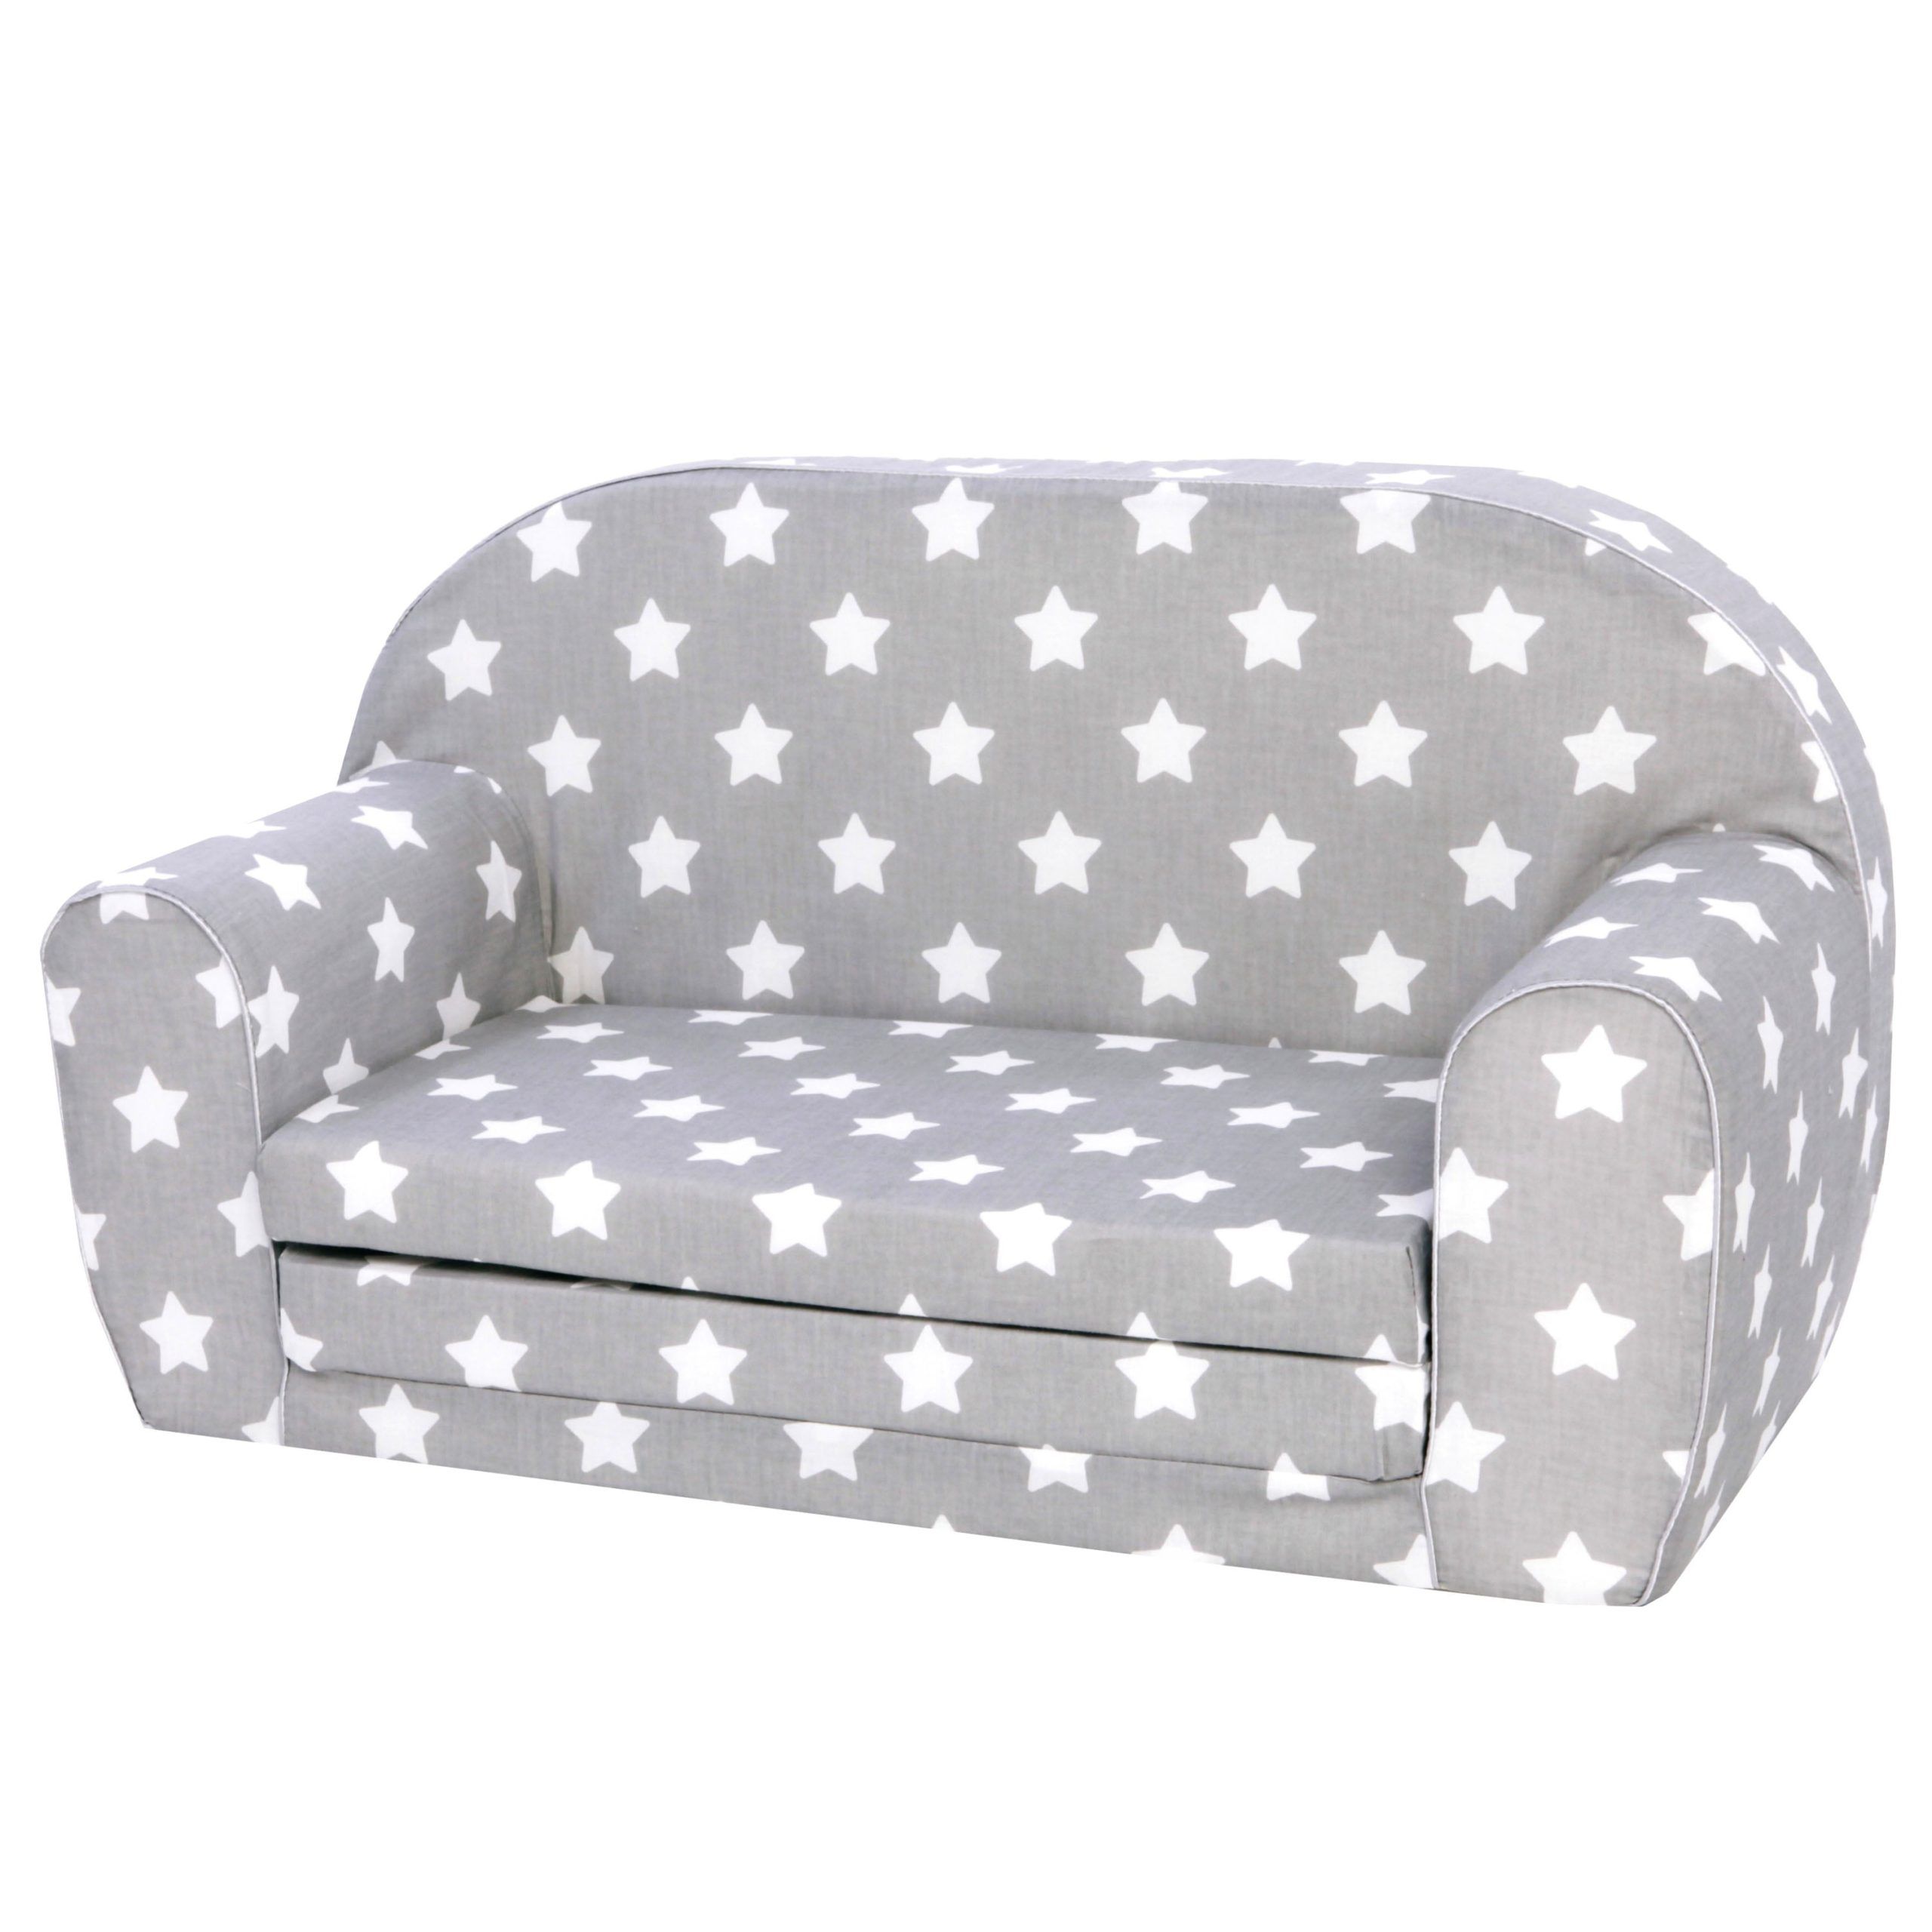 Delsit Toddler Couch & Kids Sofa – European Made Children's 2 In 1 Flip Intended For Children&#039;s Sofa Beds (View 16 of 20)